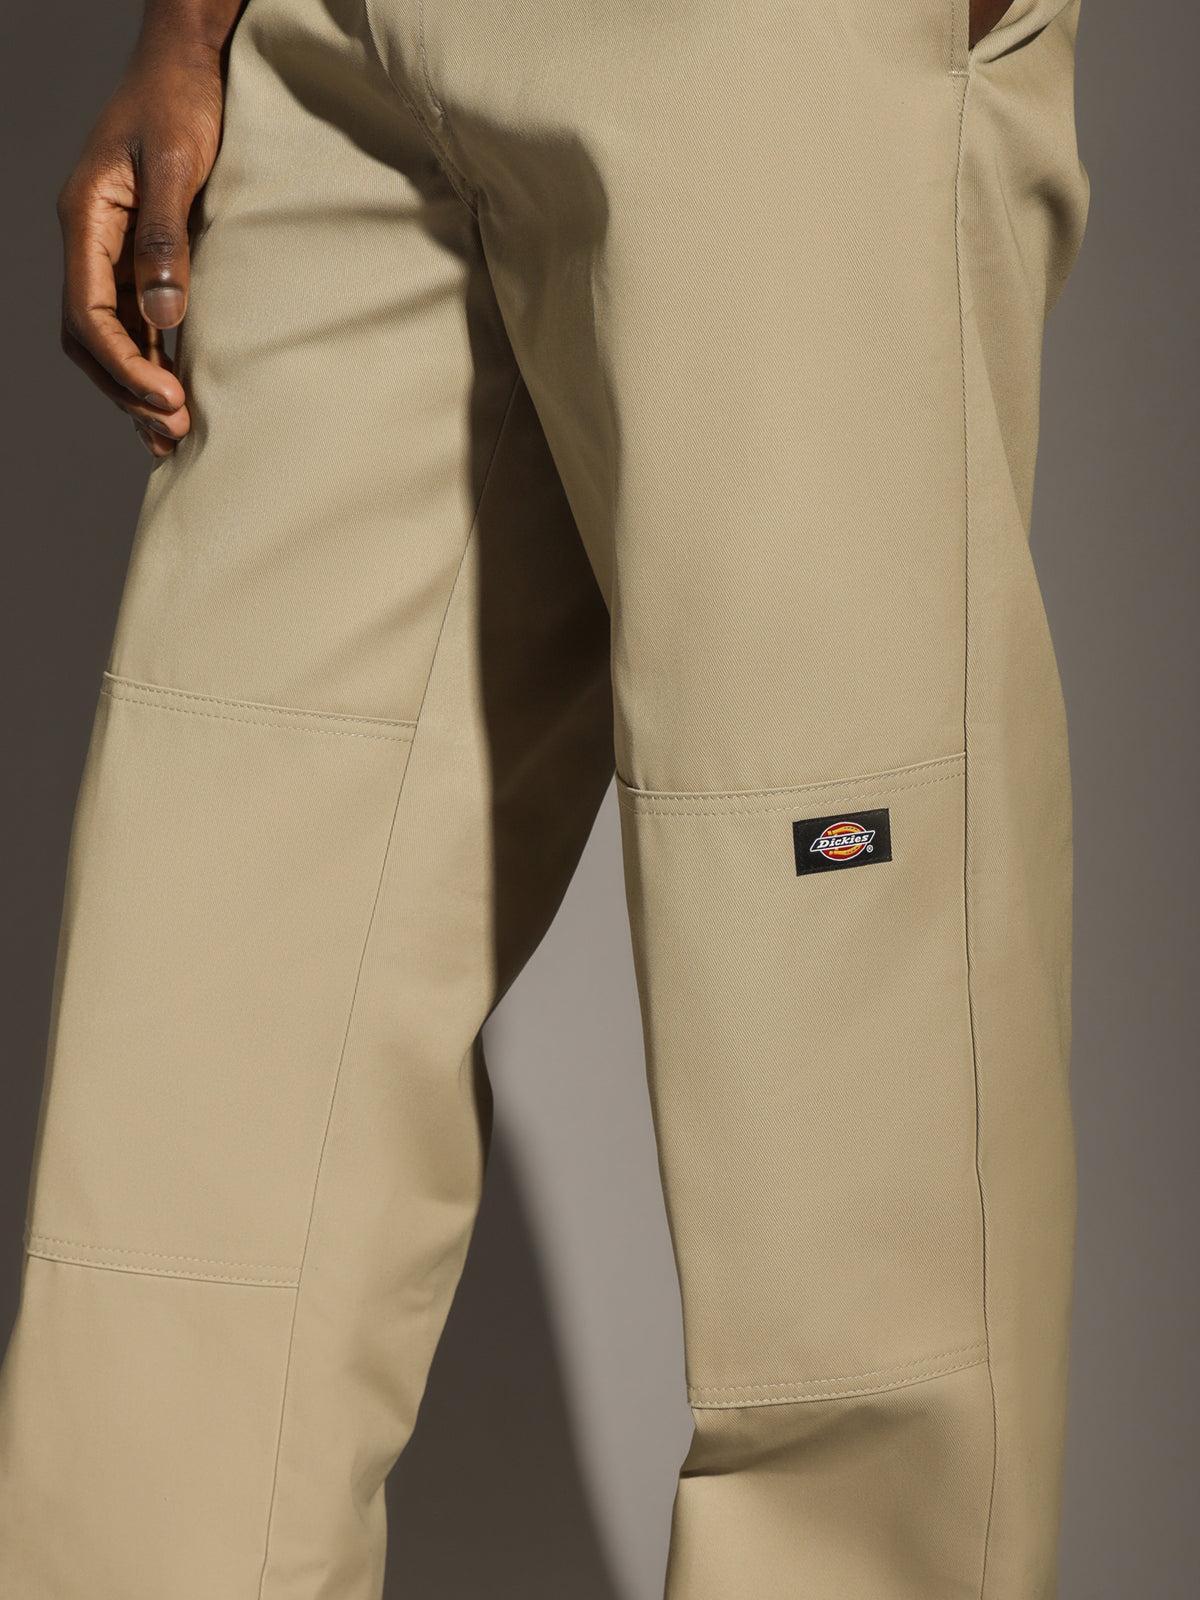 85-283 Loose Fit Double Knee Pants in Khaki